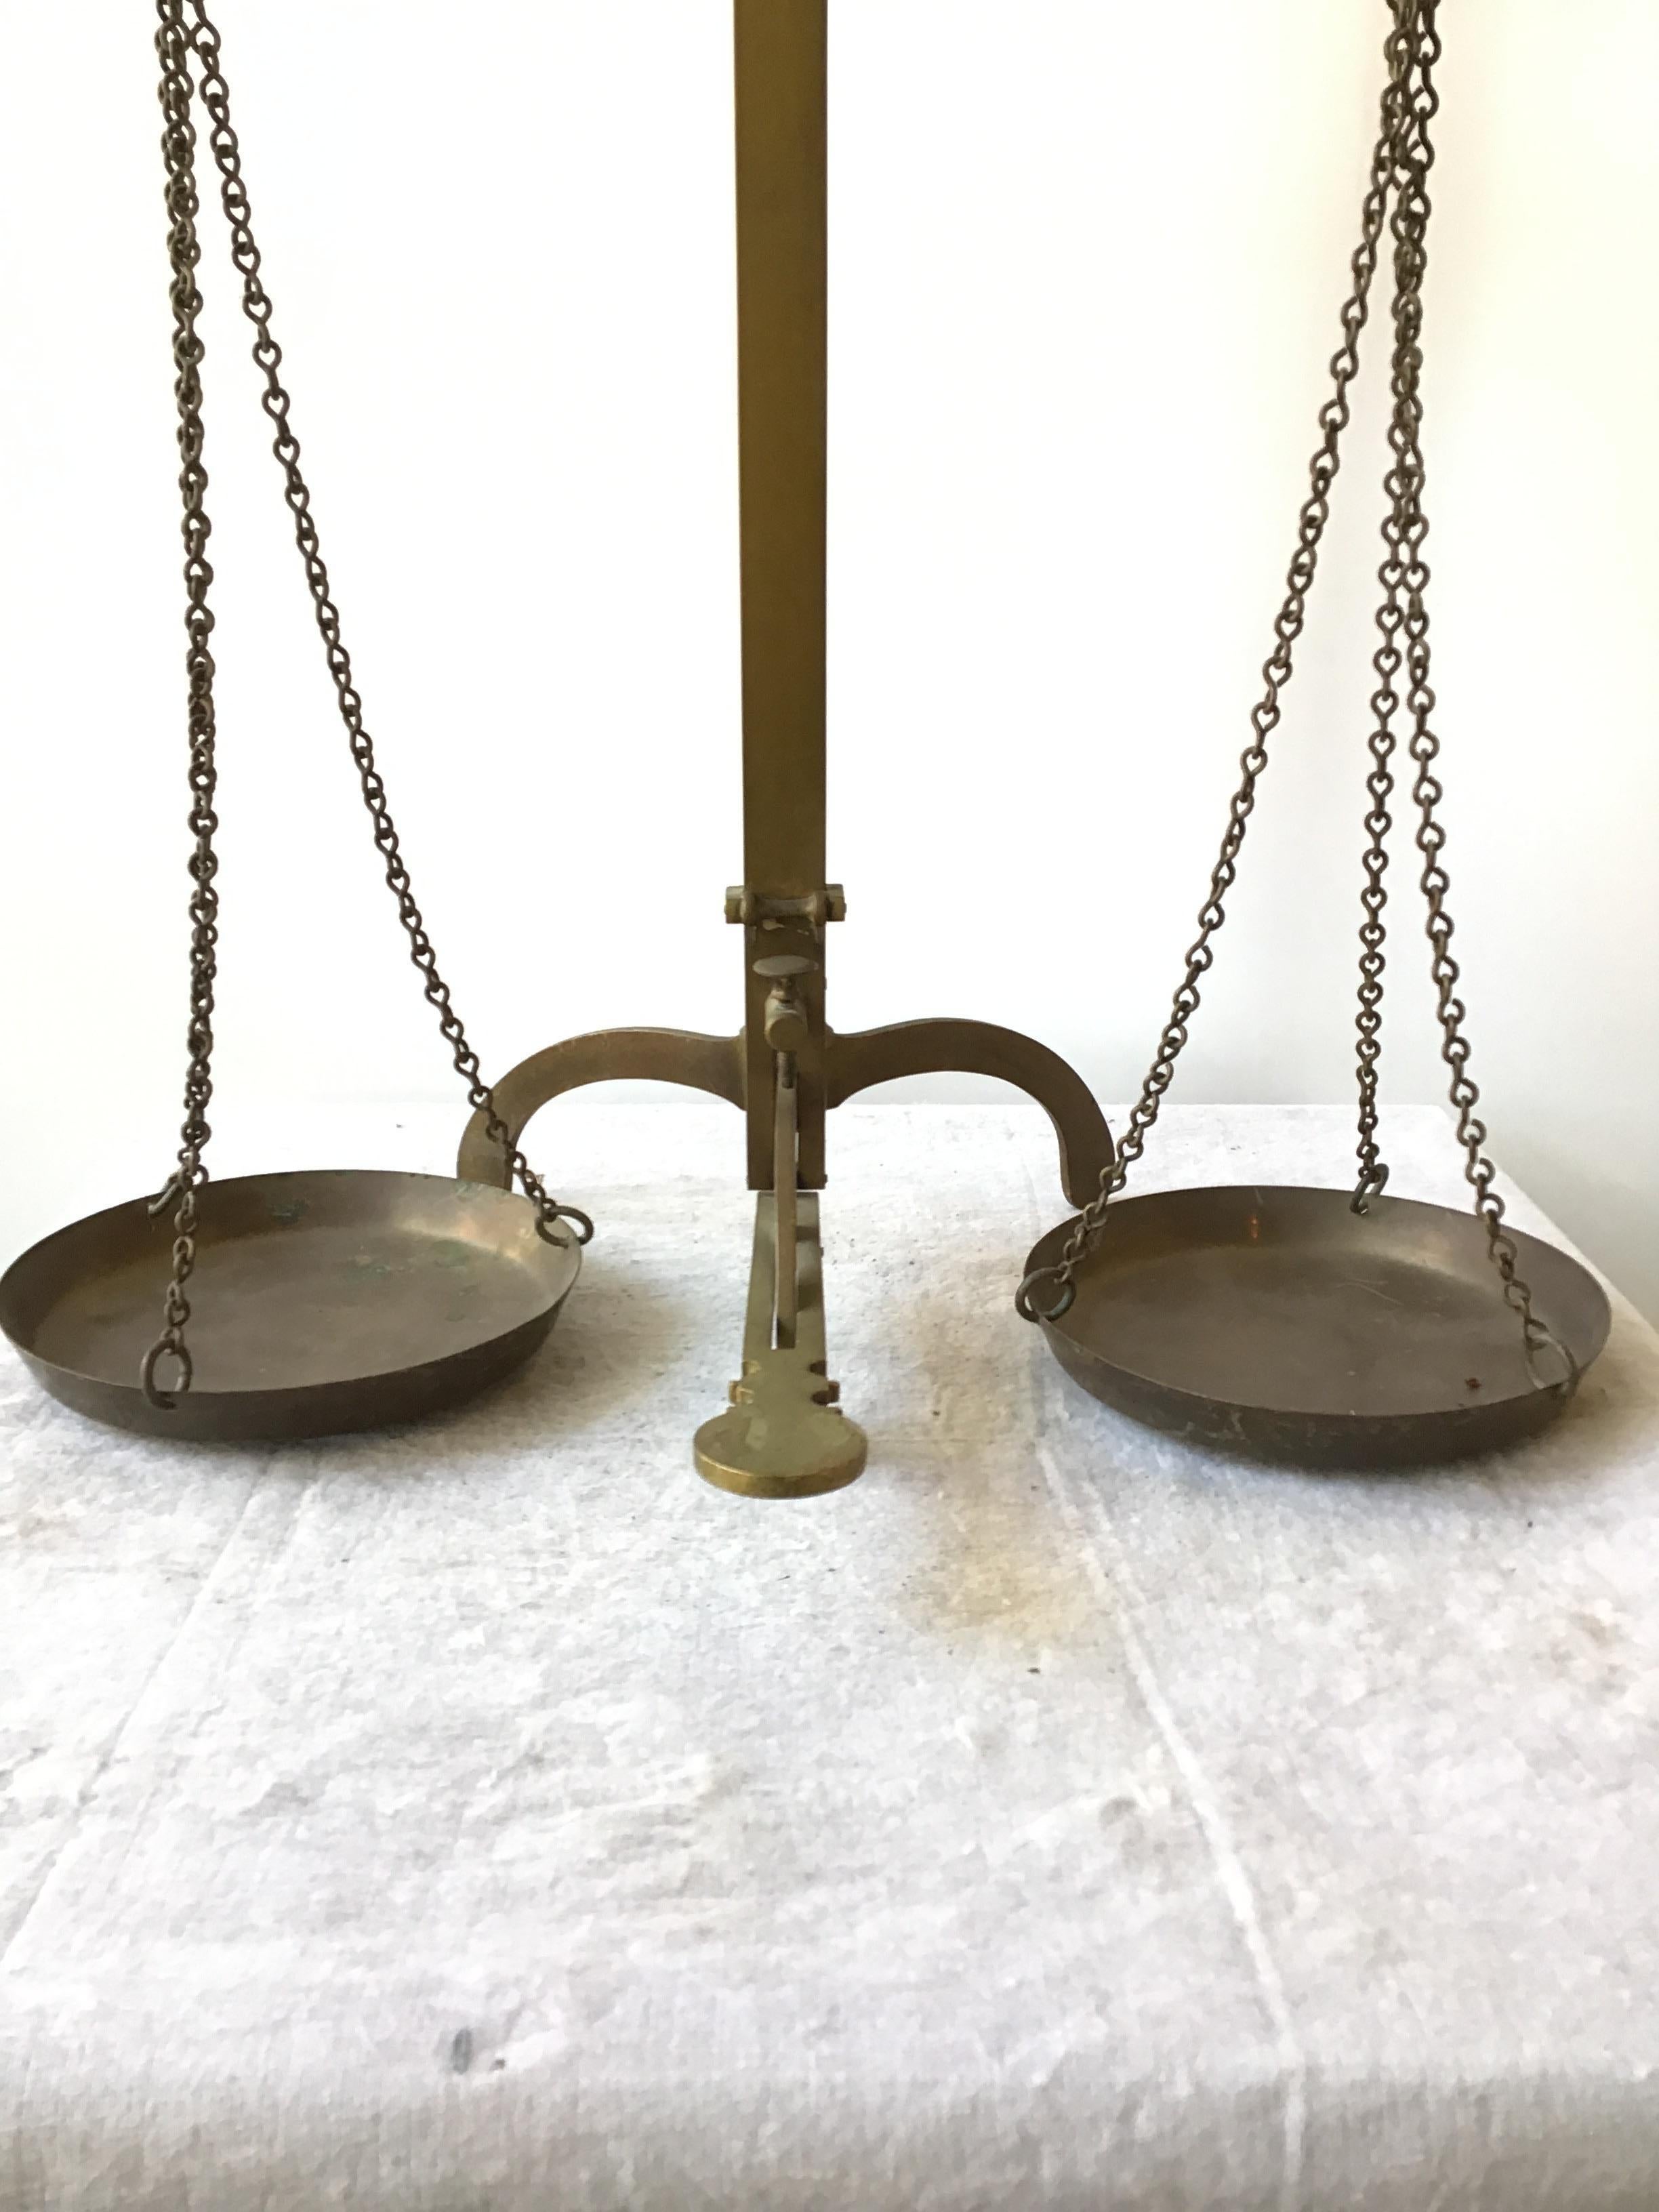 1920s Solid Brass Balancing In Good Condition For Sale In Tarrytown, NY